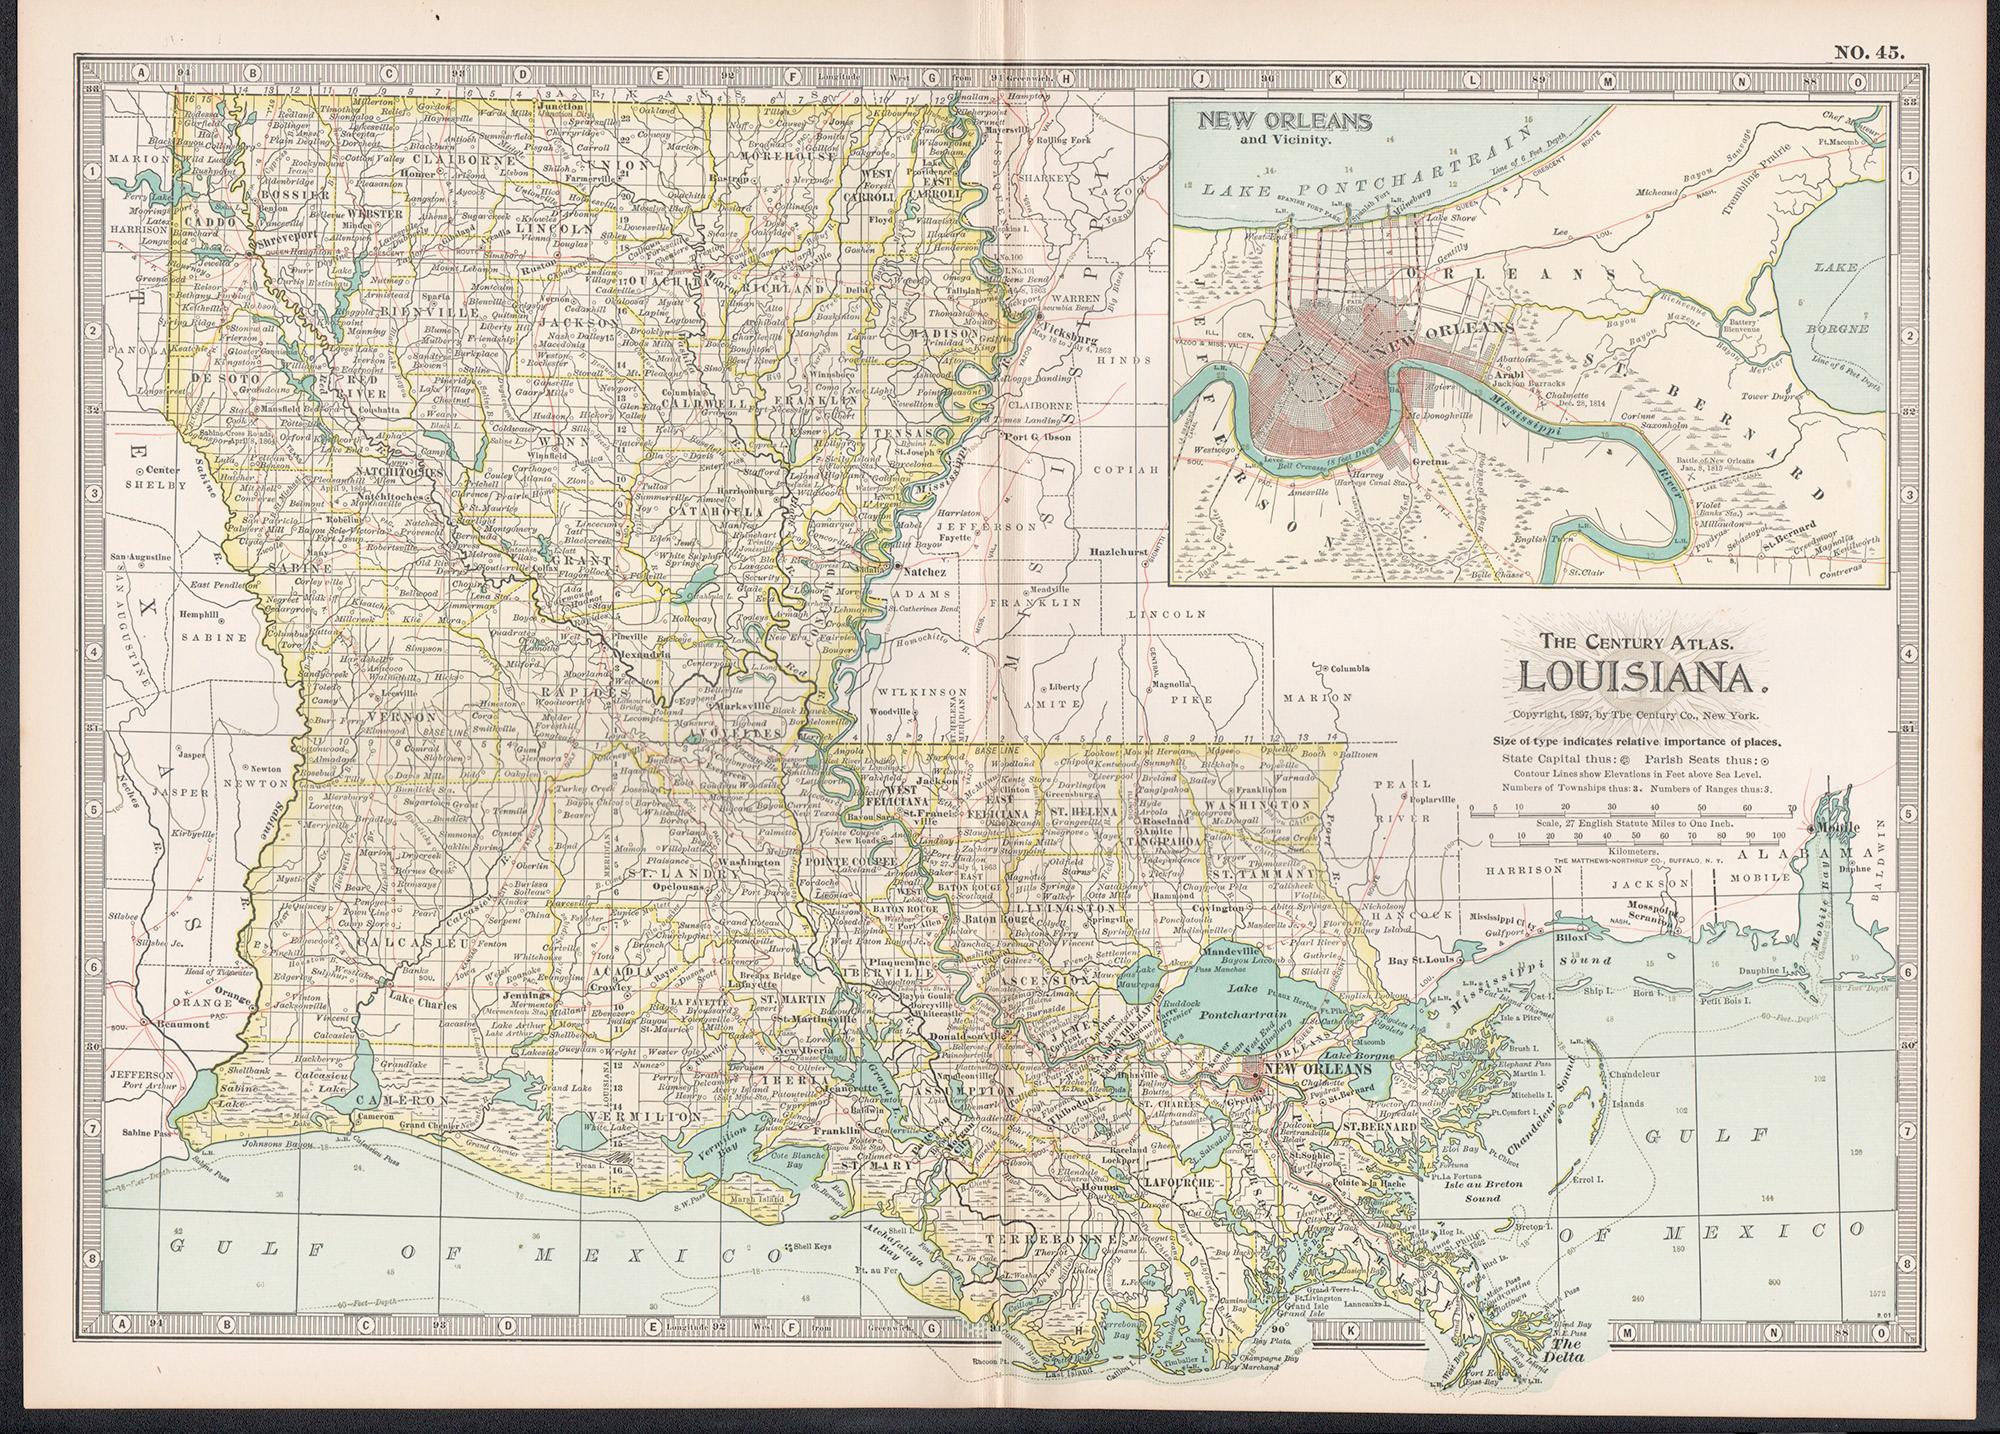 Louisiana. USA Century Atlas state antique vintage map - Print by Unknown